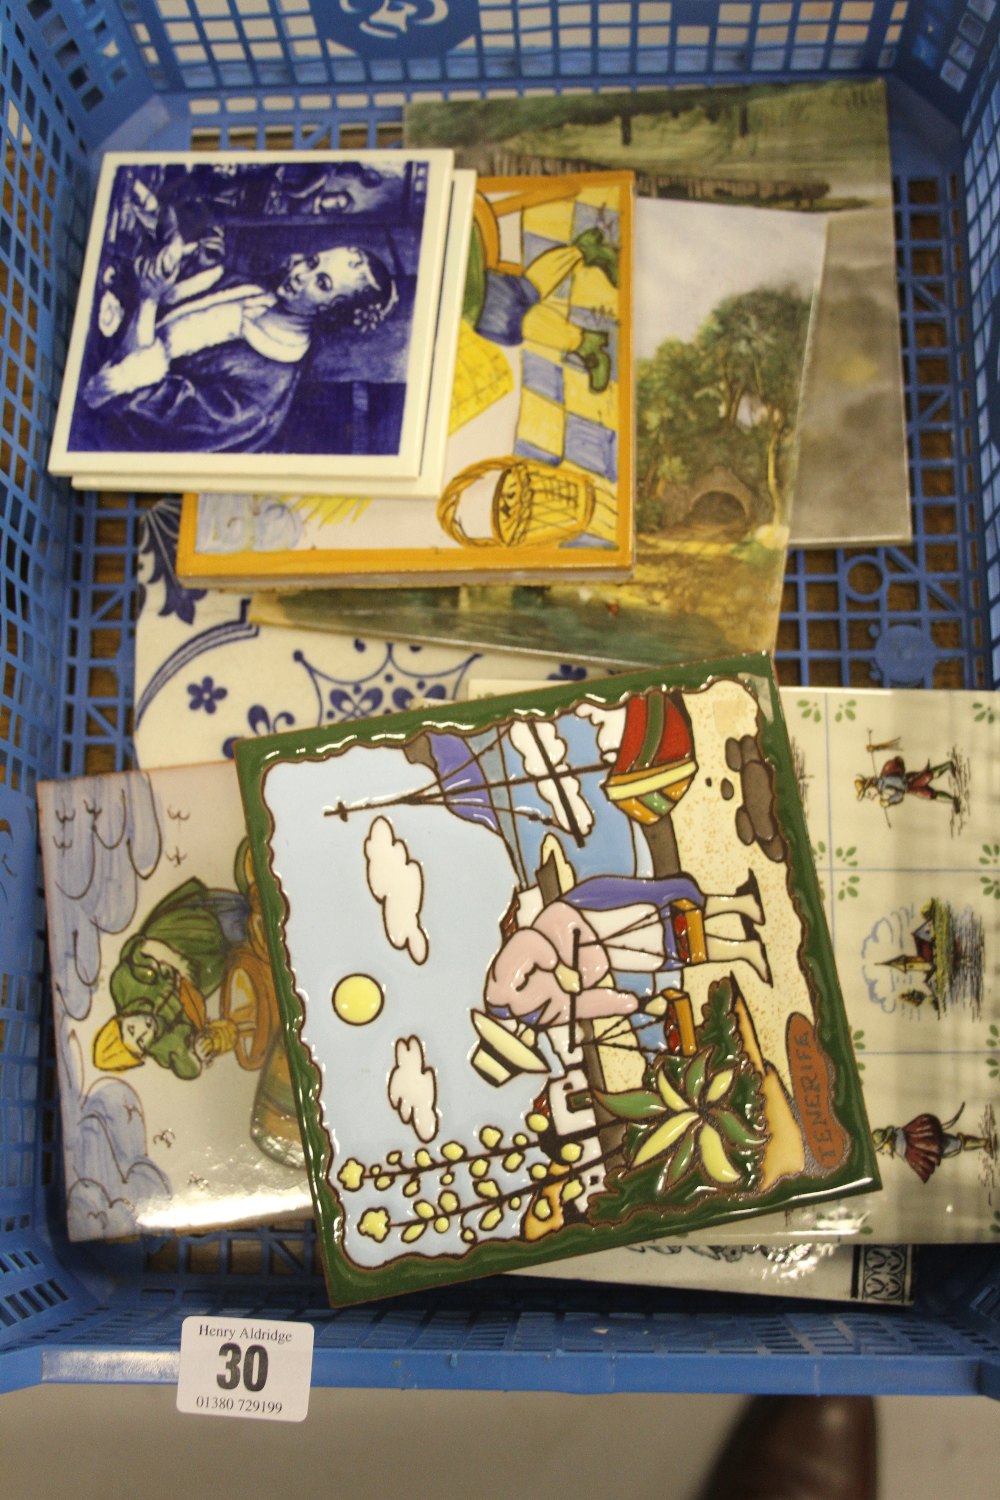 20th cent. Ceramics: Tiles, Wedgwood, Delft and others (10 x tiles).